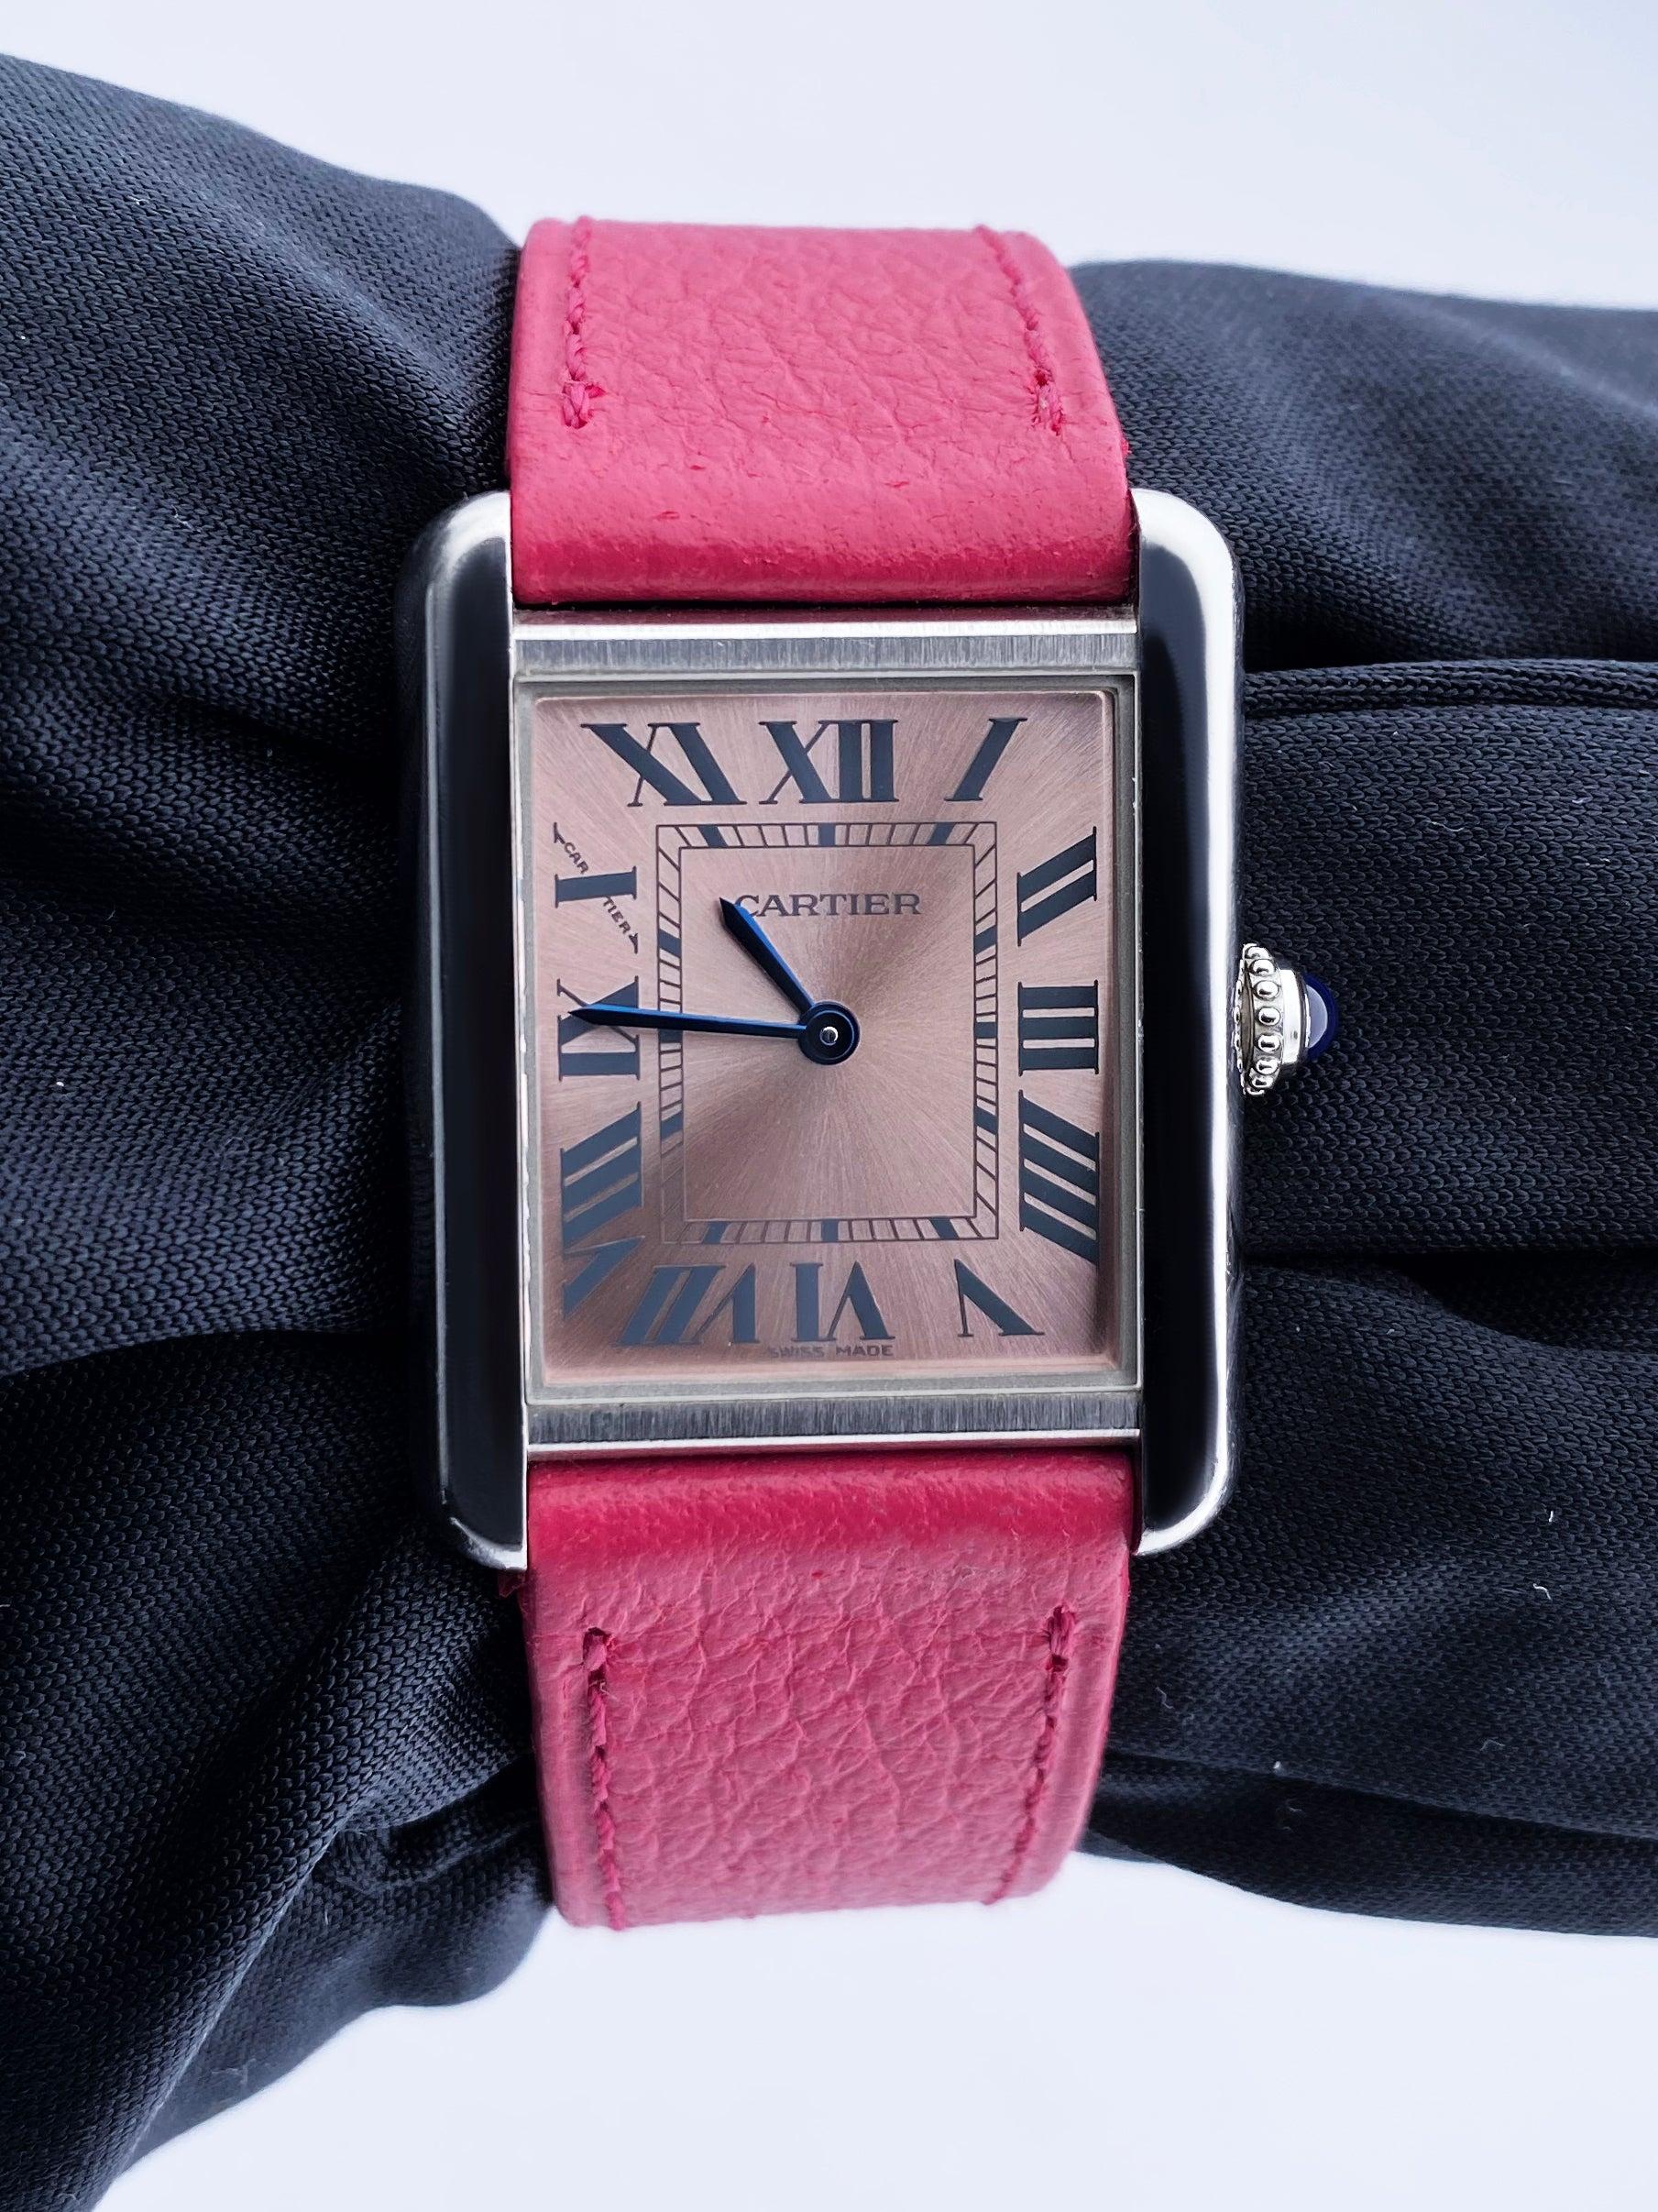 Cartier Tank Solo 3170 Ladies Watch. 24mm stainless steel case. Stainless steel stationary bezel. Pink dial with blue steel hands and Roman numeral hour markers. Minute markers on the inner dial. Pink leather strap with deployment clasp. Will fit up